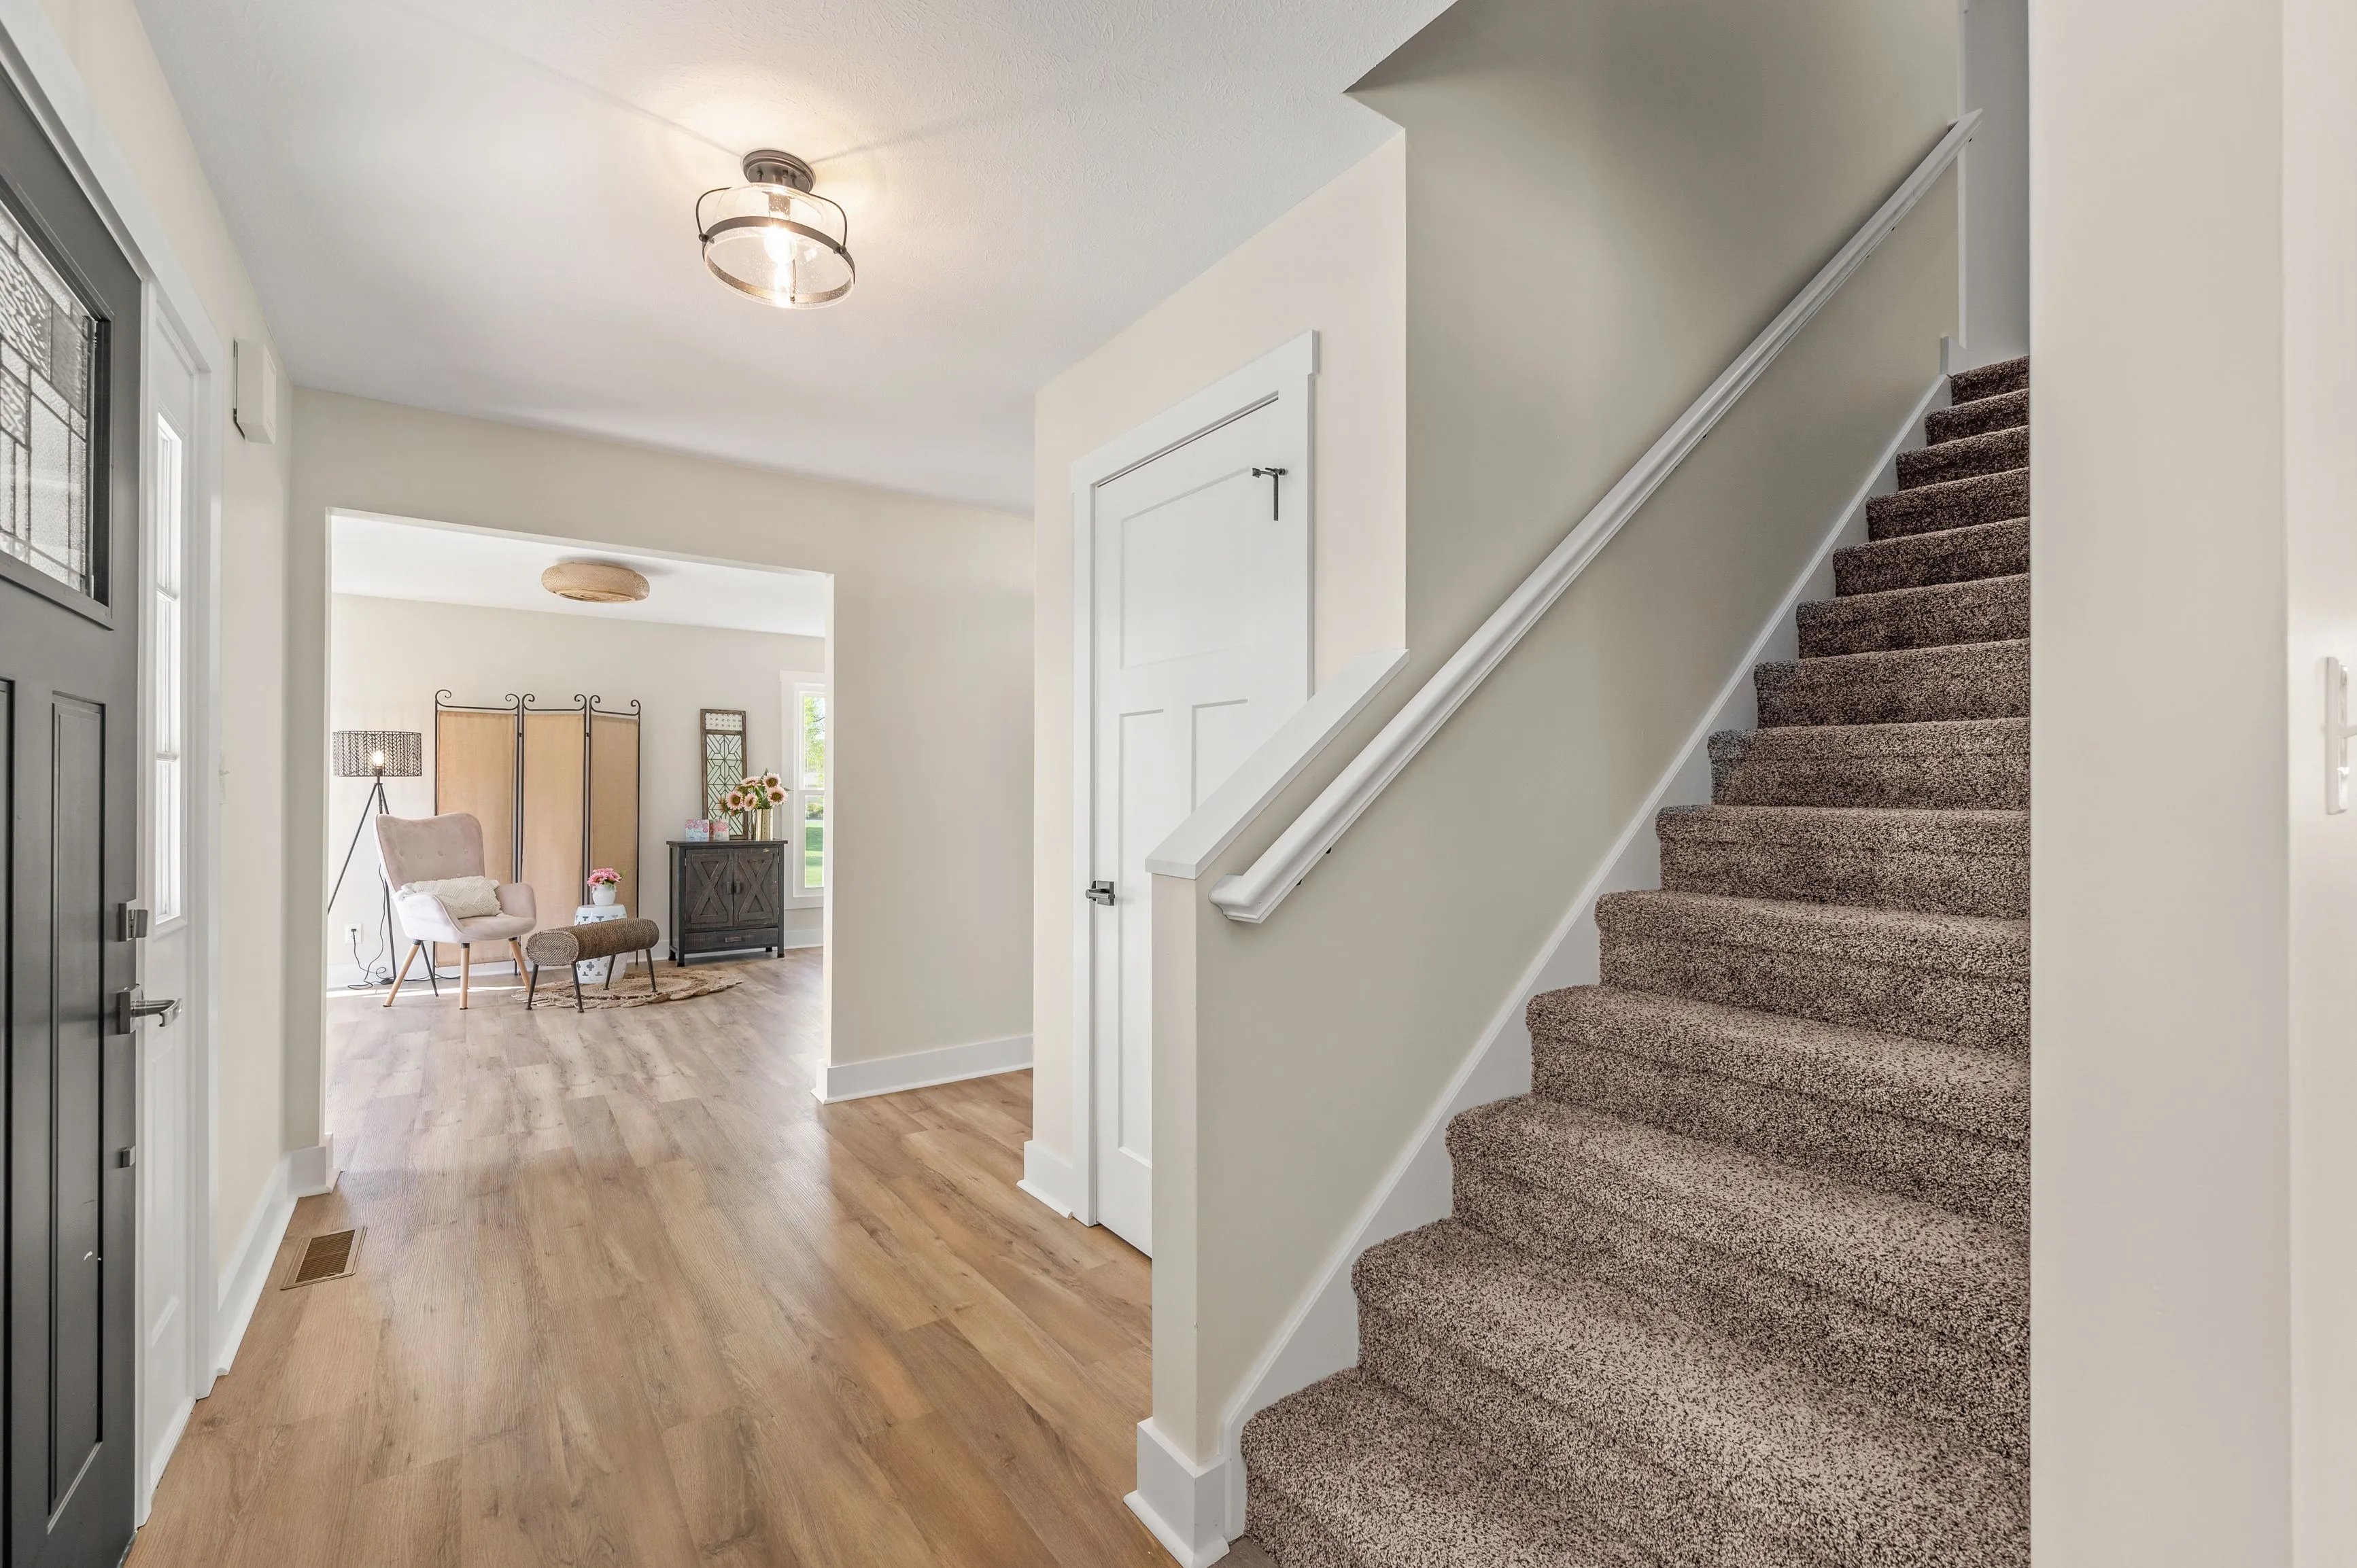 Interior view of a modern home entryway with hardwood floors leading to a staircase with carpeted steps and a well-lit, inviting living area in the background.